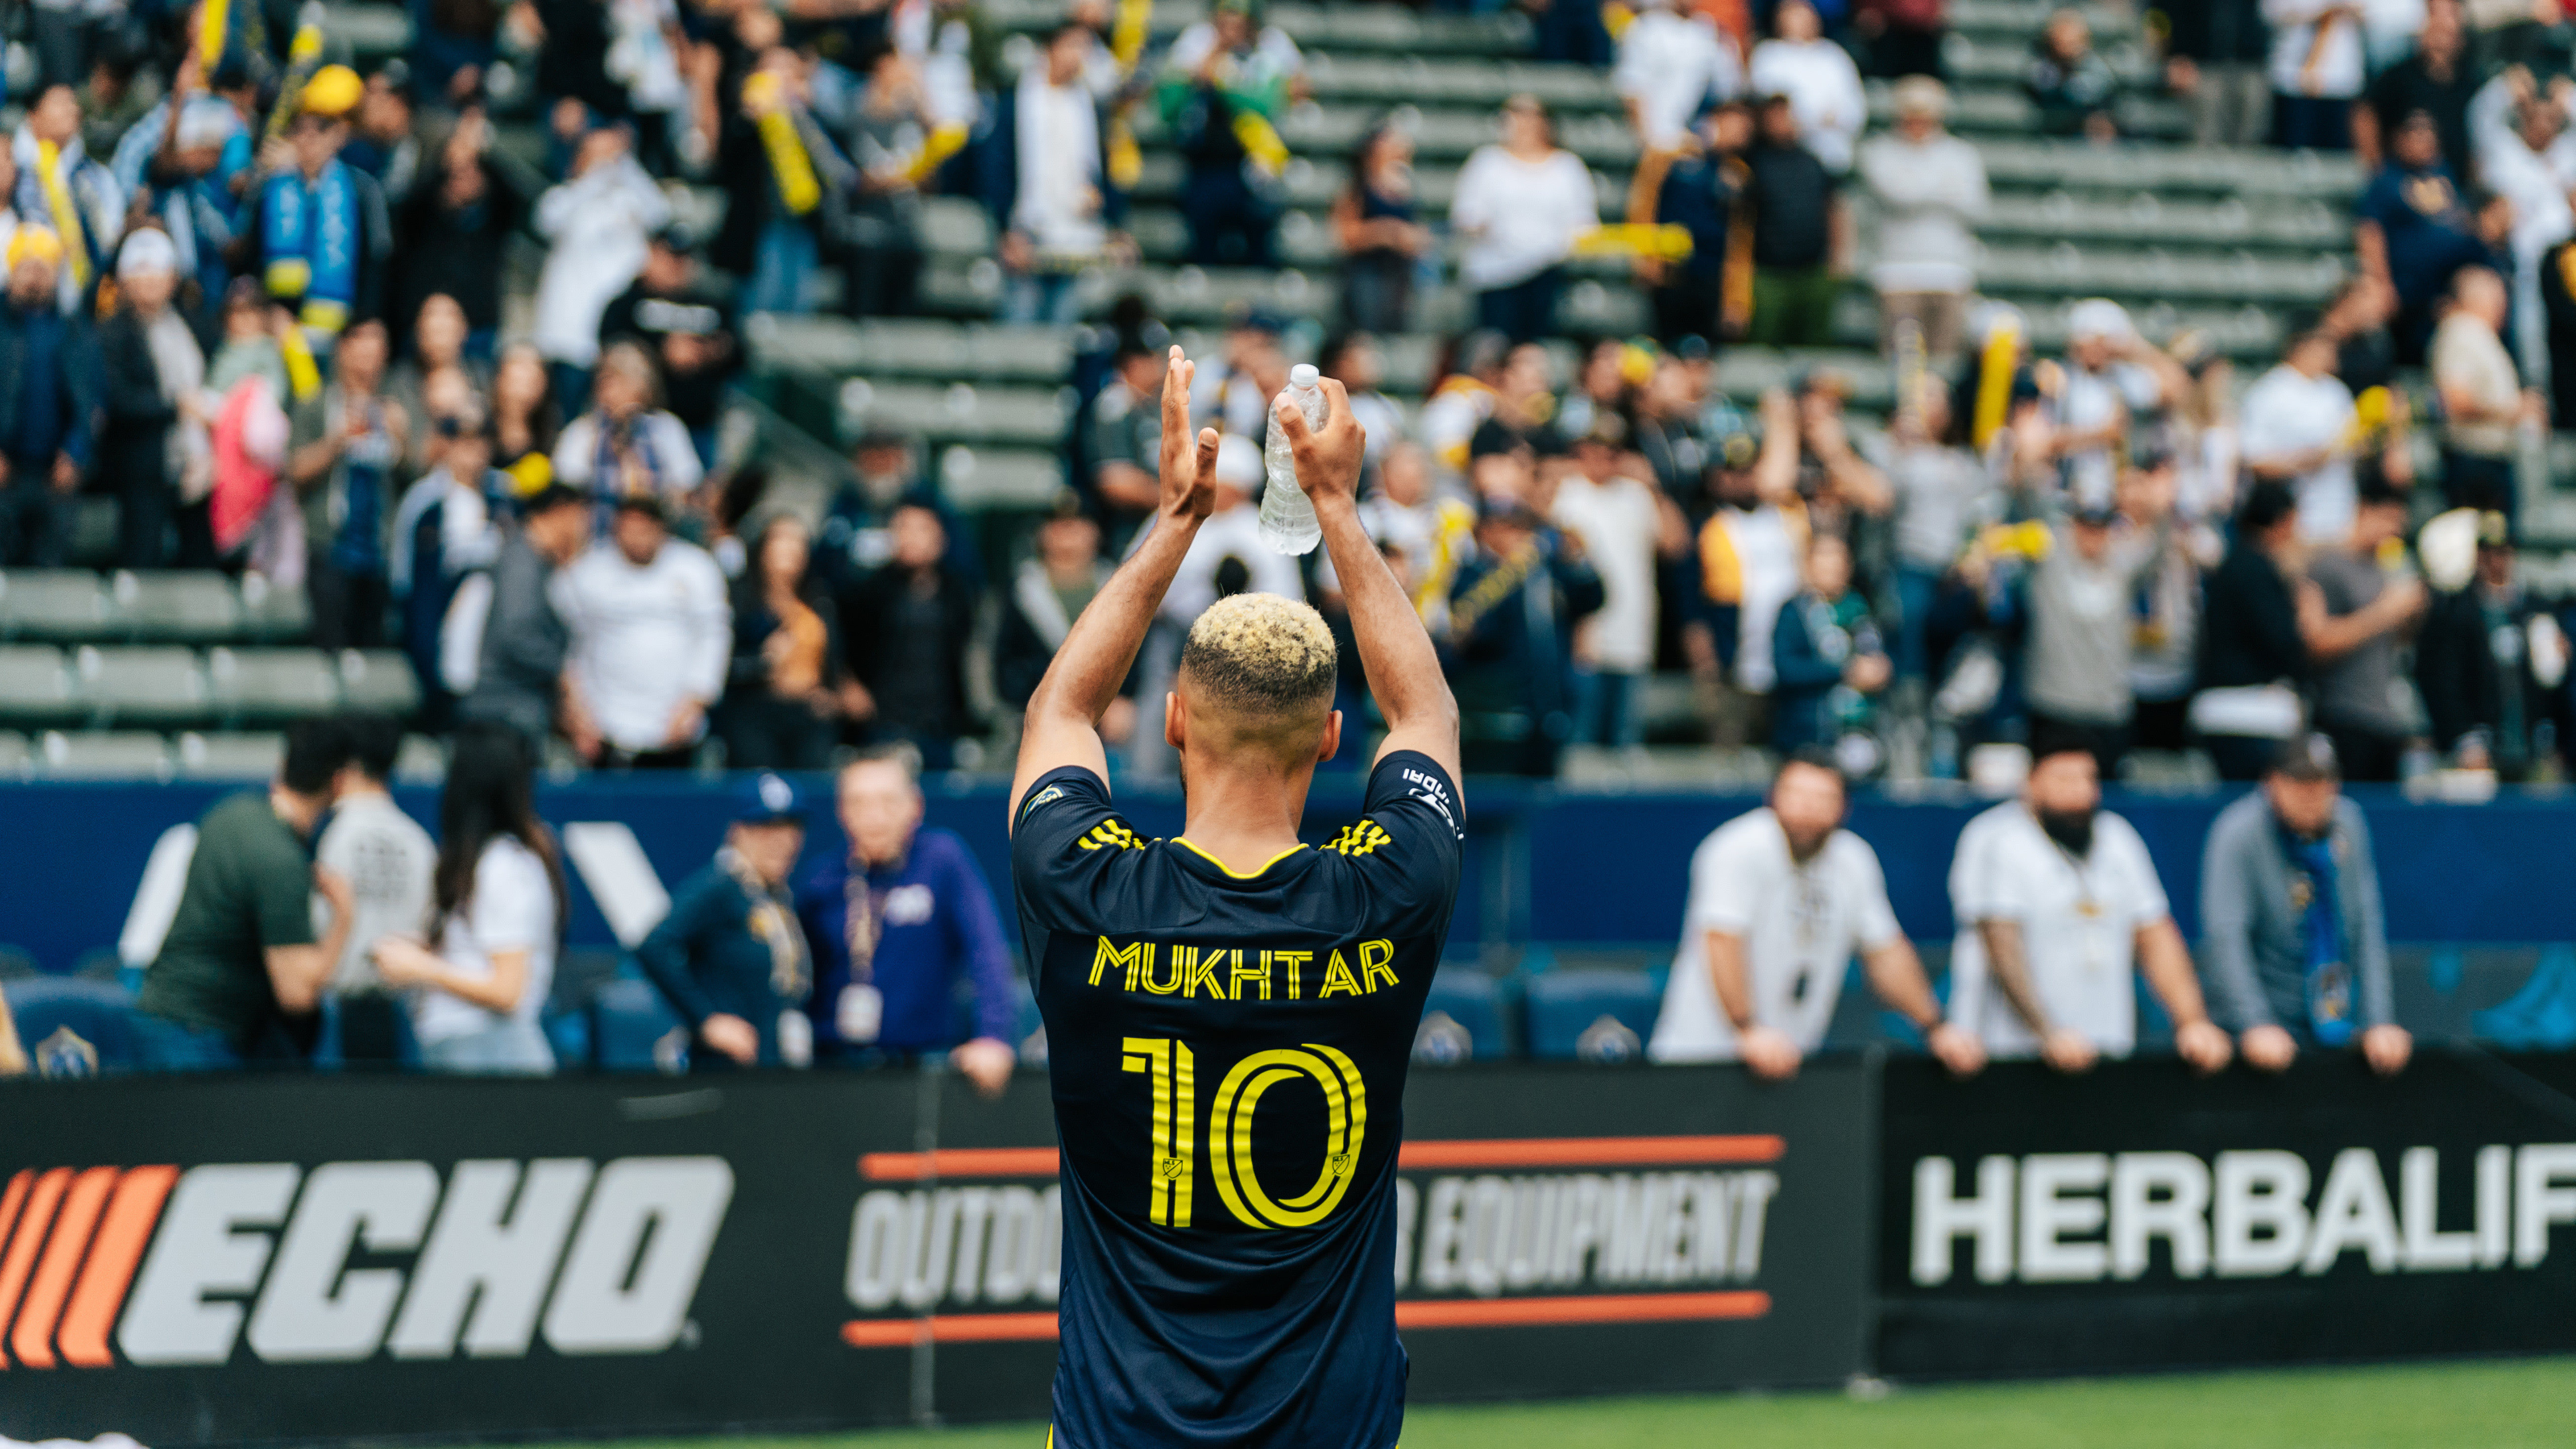 Nashville SC Falls to LA Galaxy in the 2022 Audi MLS Cup Playoffs